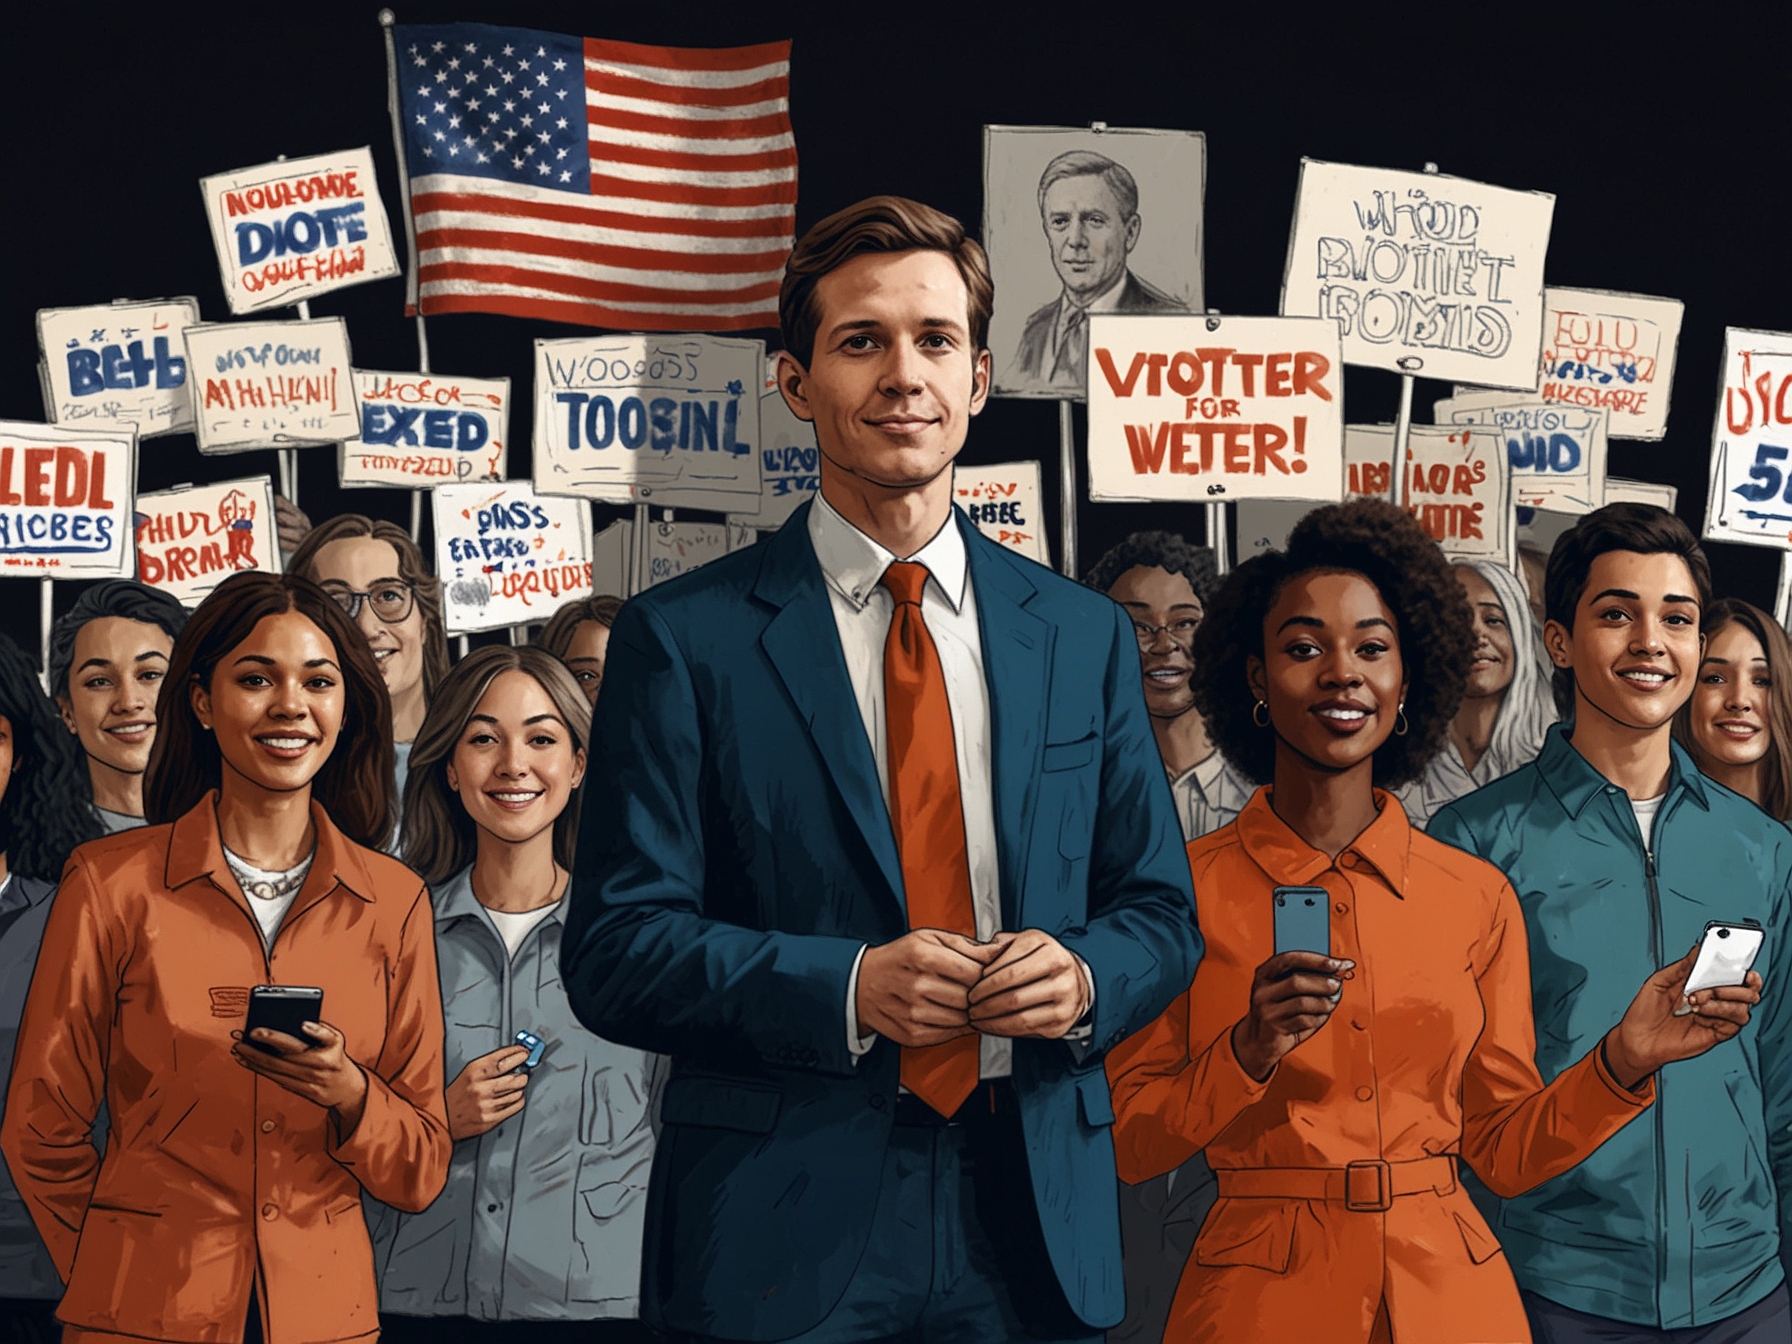 A digital campaign concept showing progressive political ads on social media, highlighting the push for modern strategies to mobilize young and diverse voter bases.